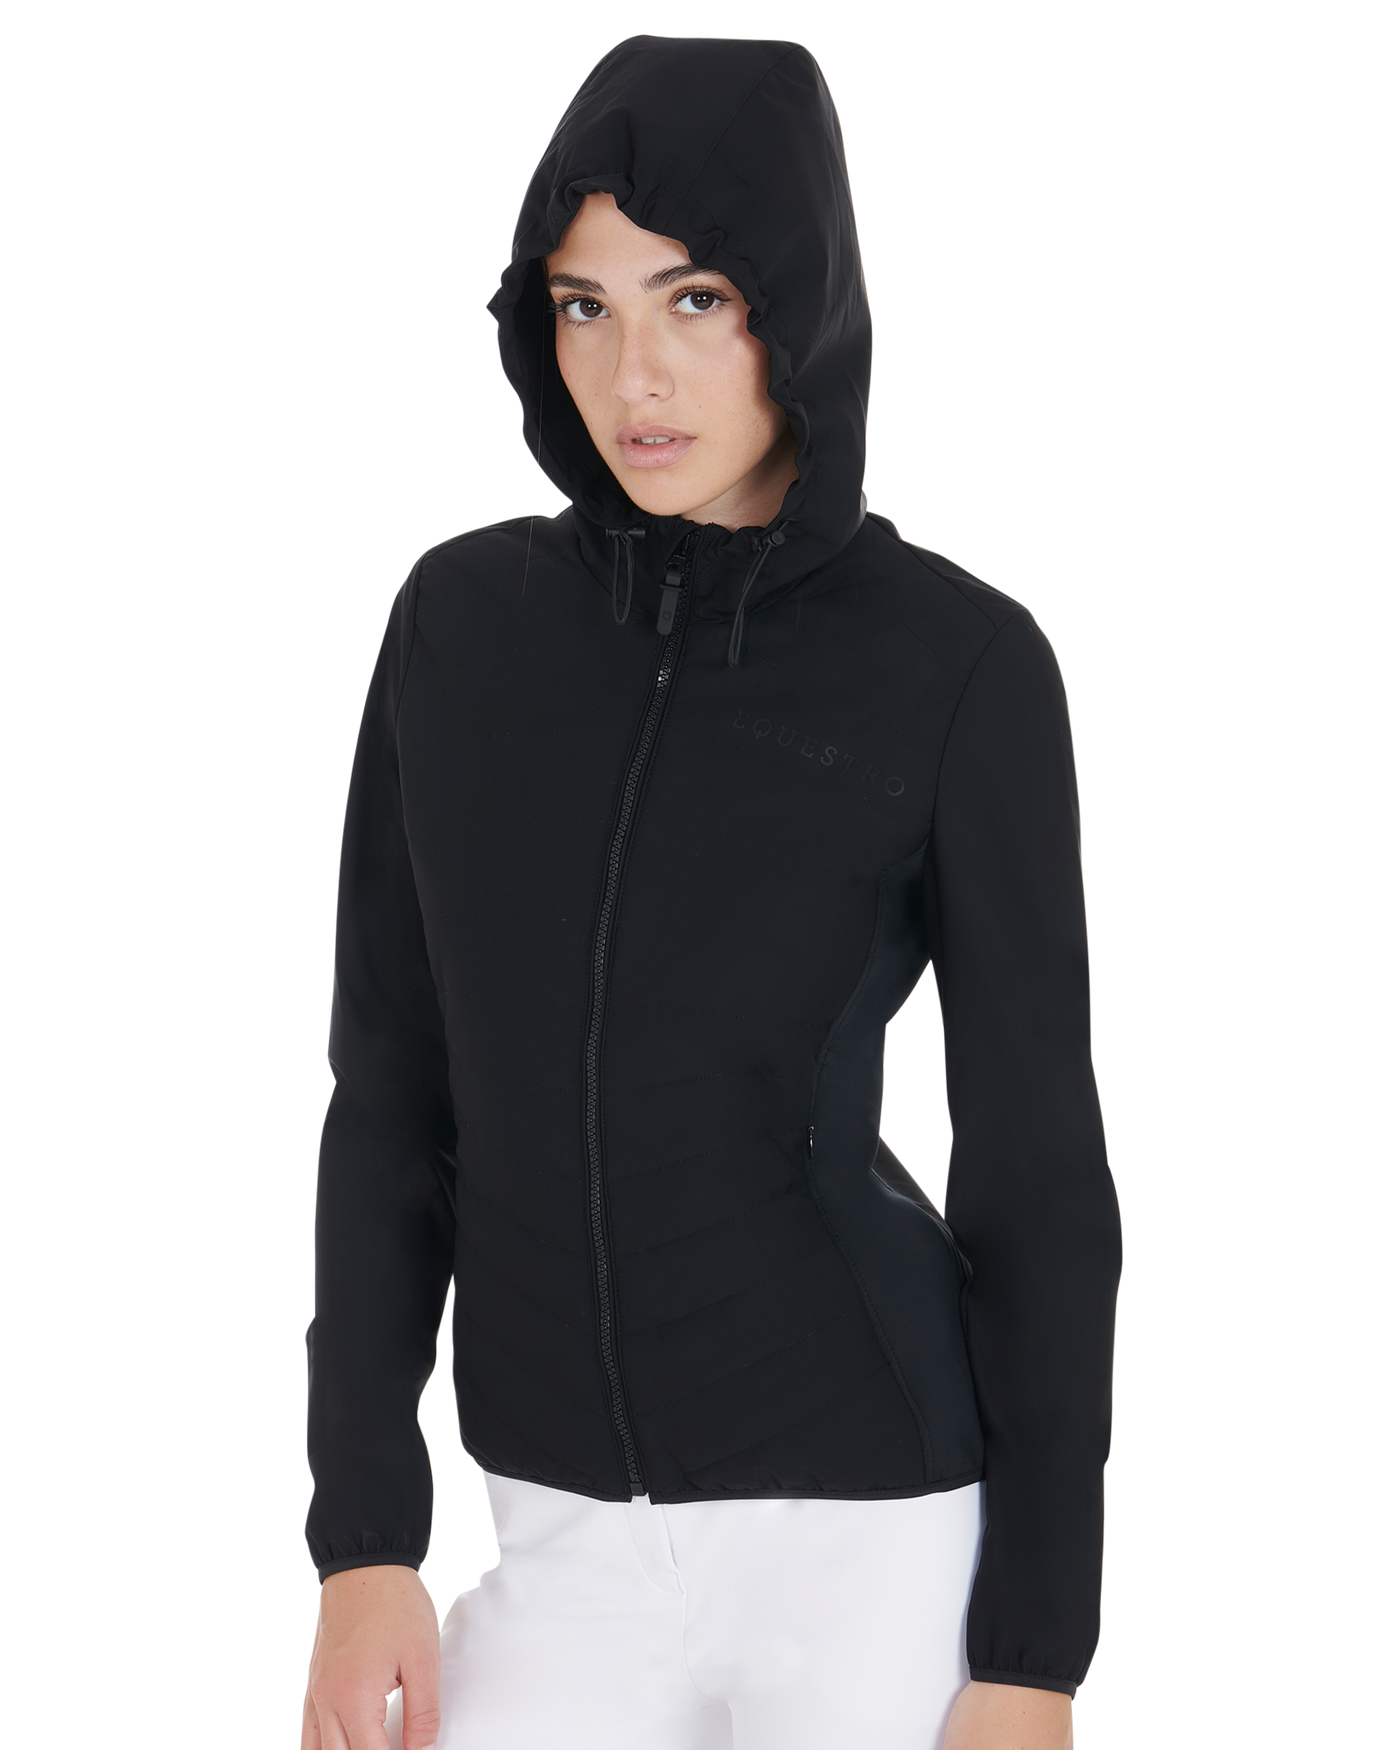 Equestro Woman Technical Down Jacket